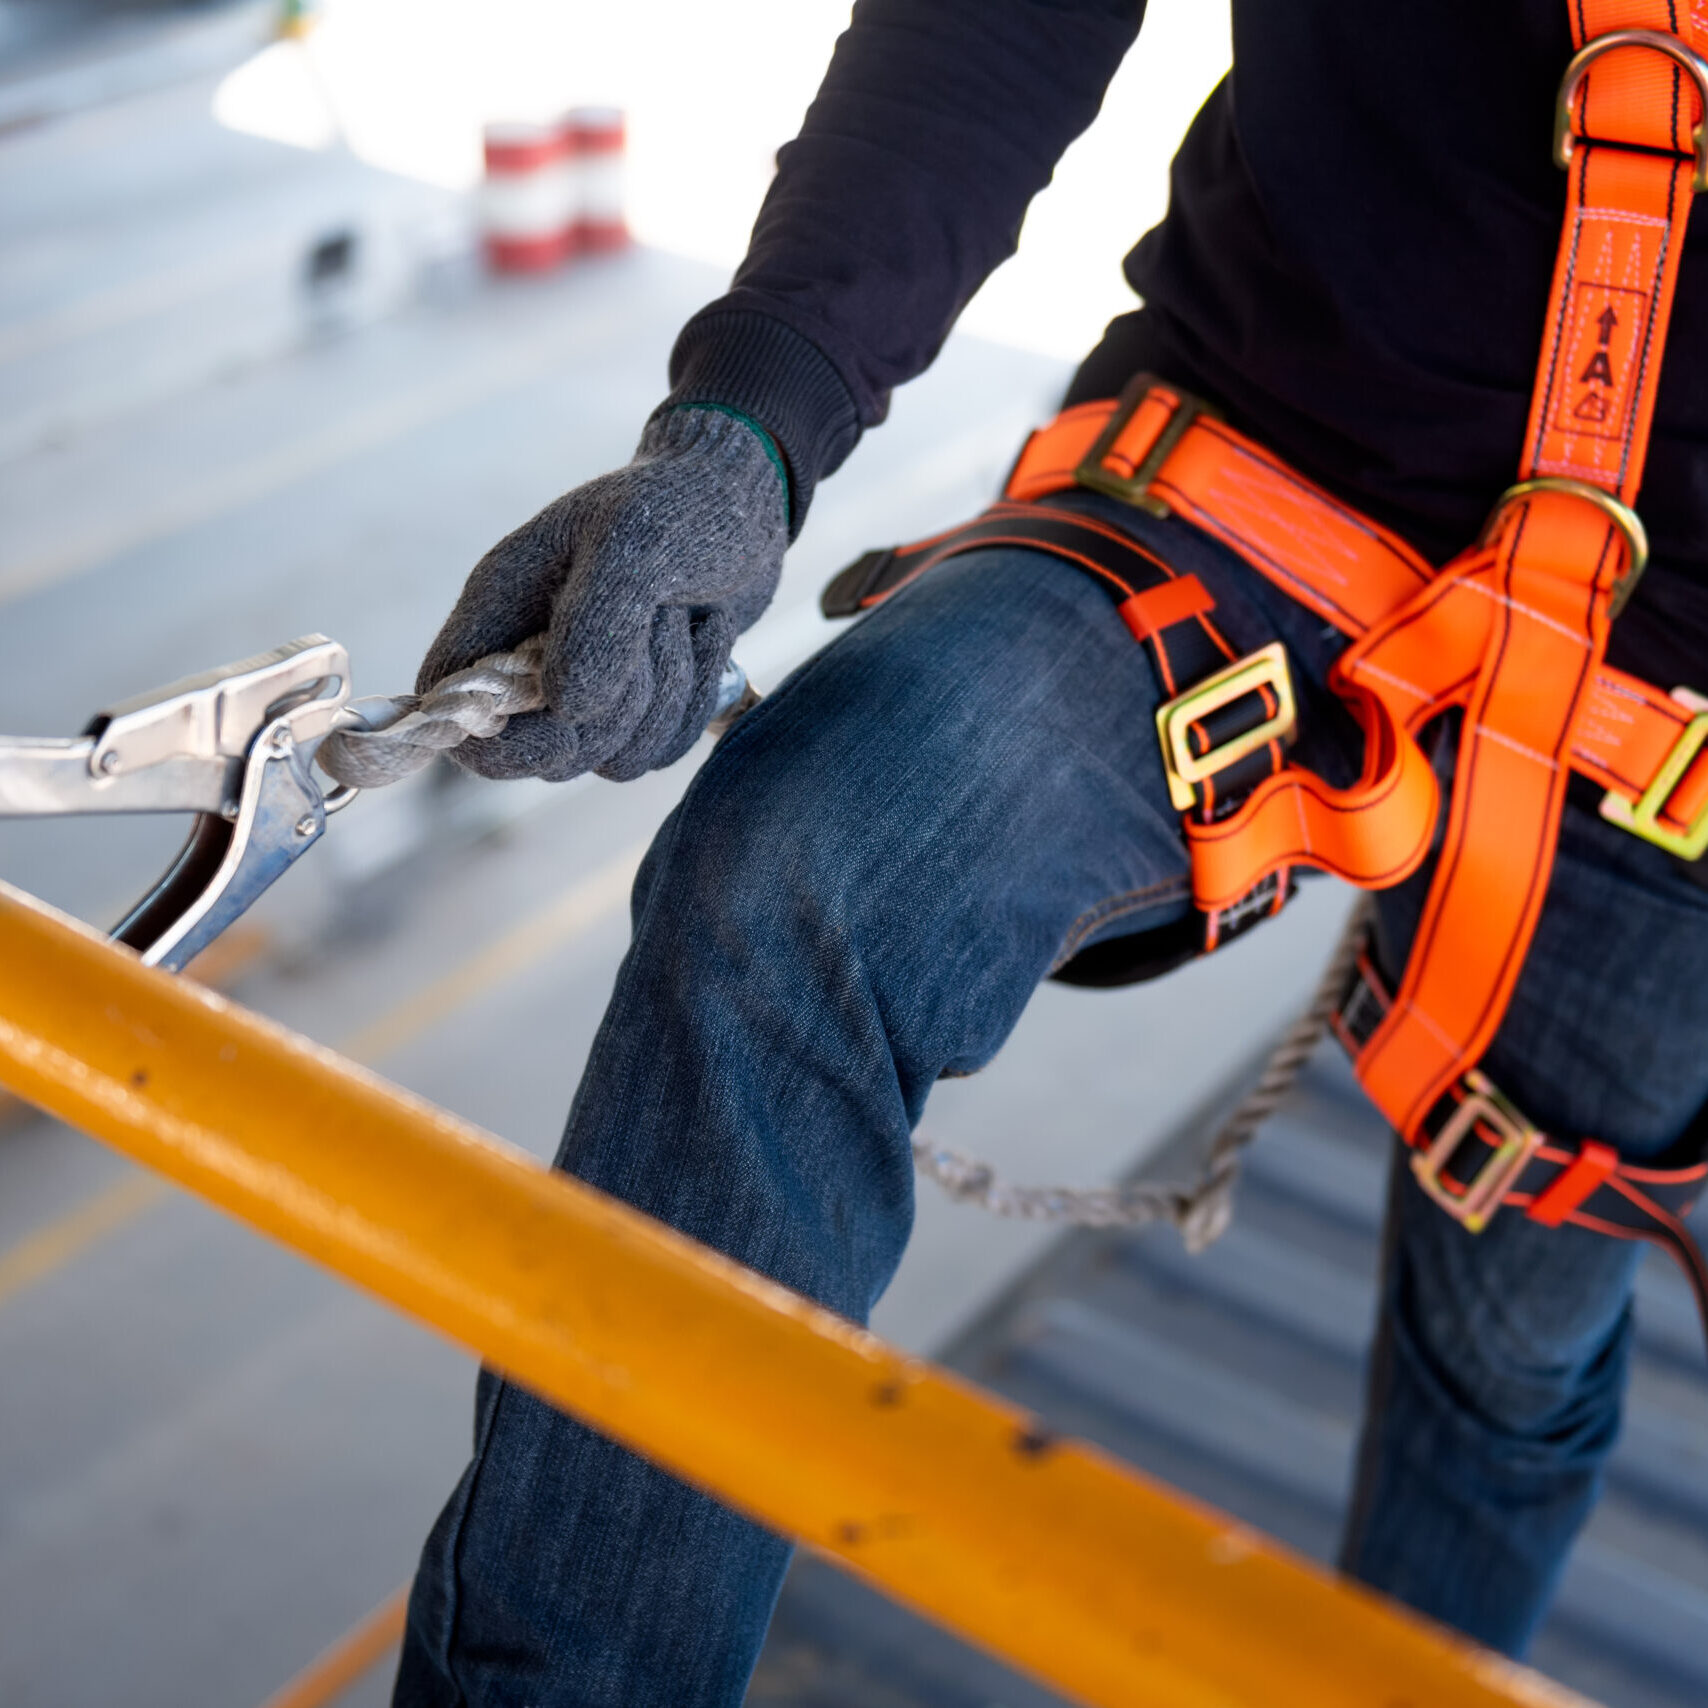 Electrical contractor using a safety harness